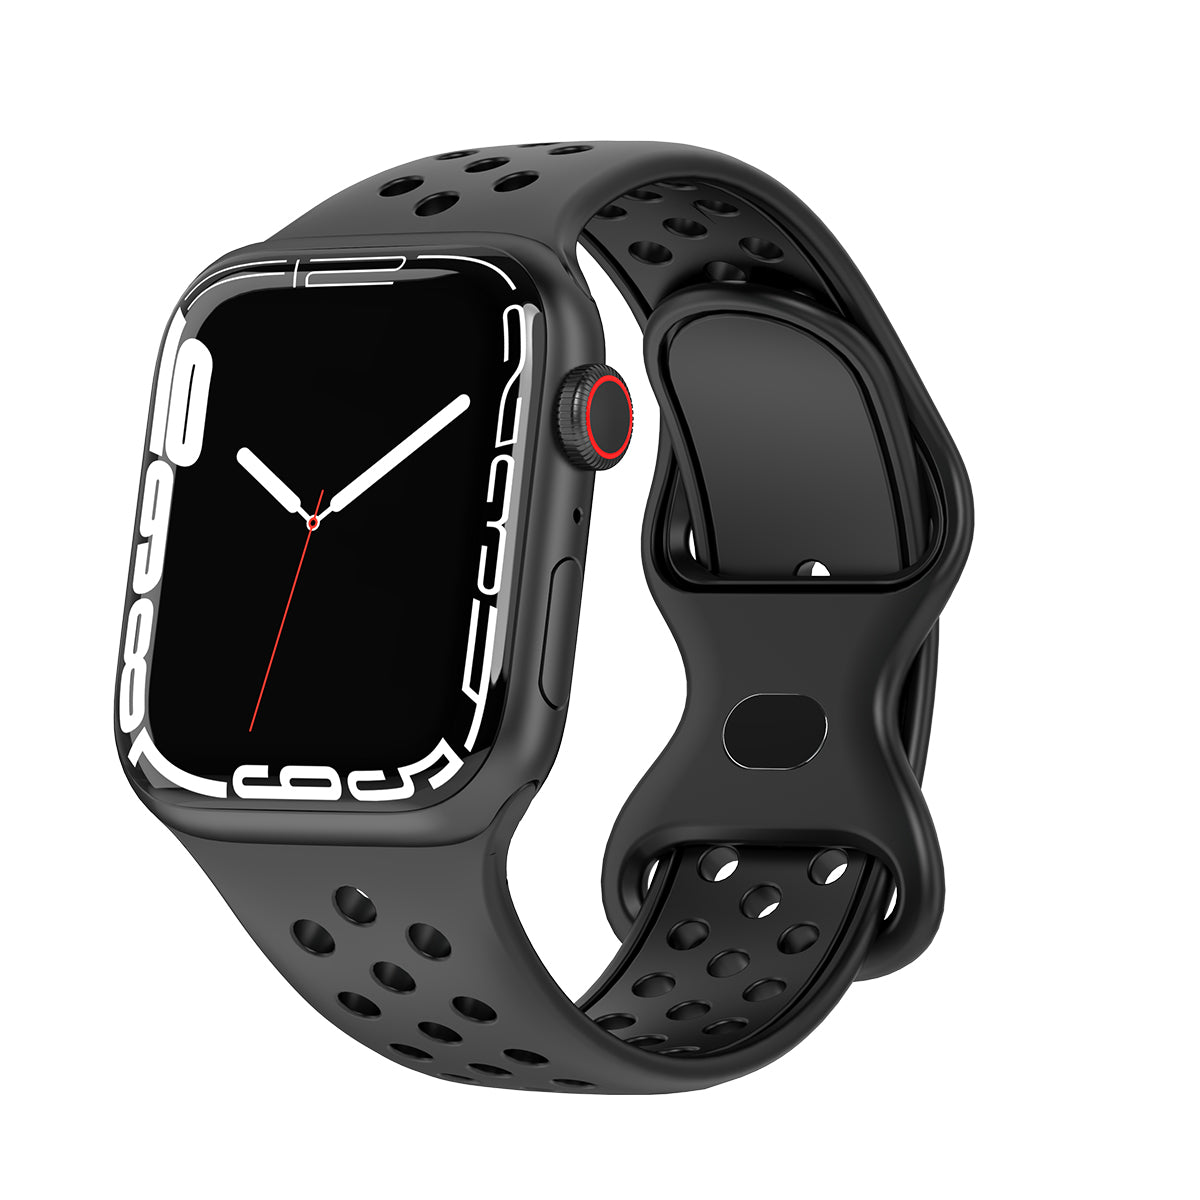 Silicone Band for Apple Watch Band